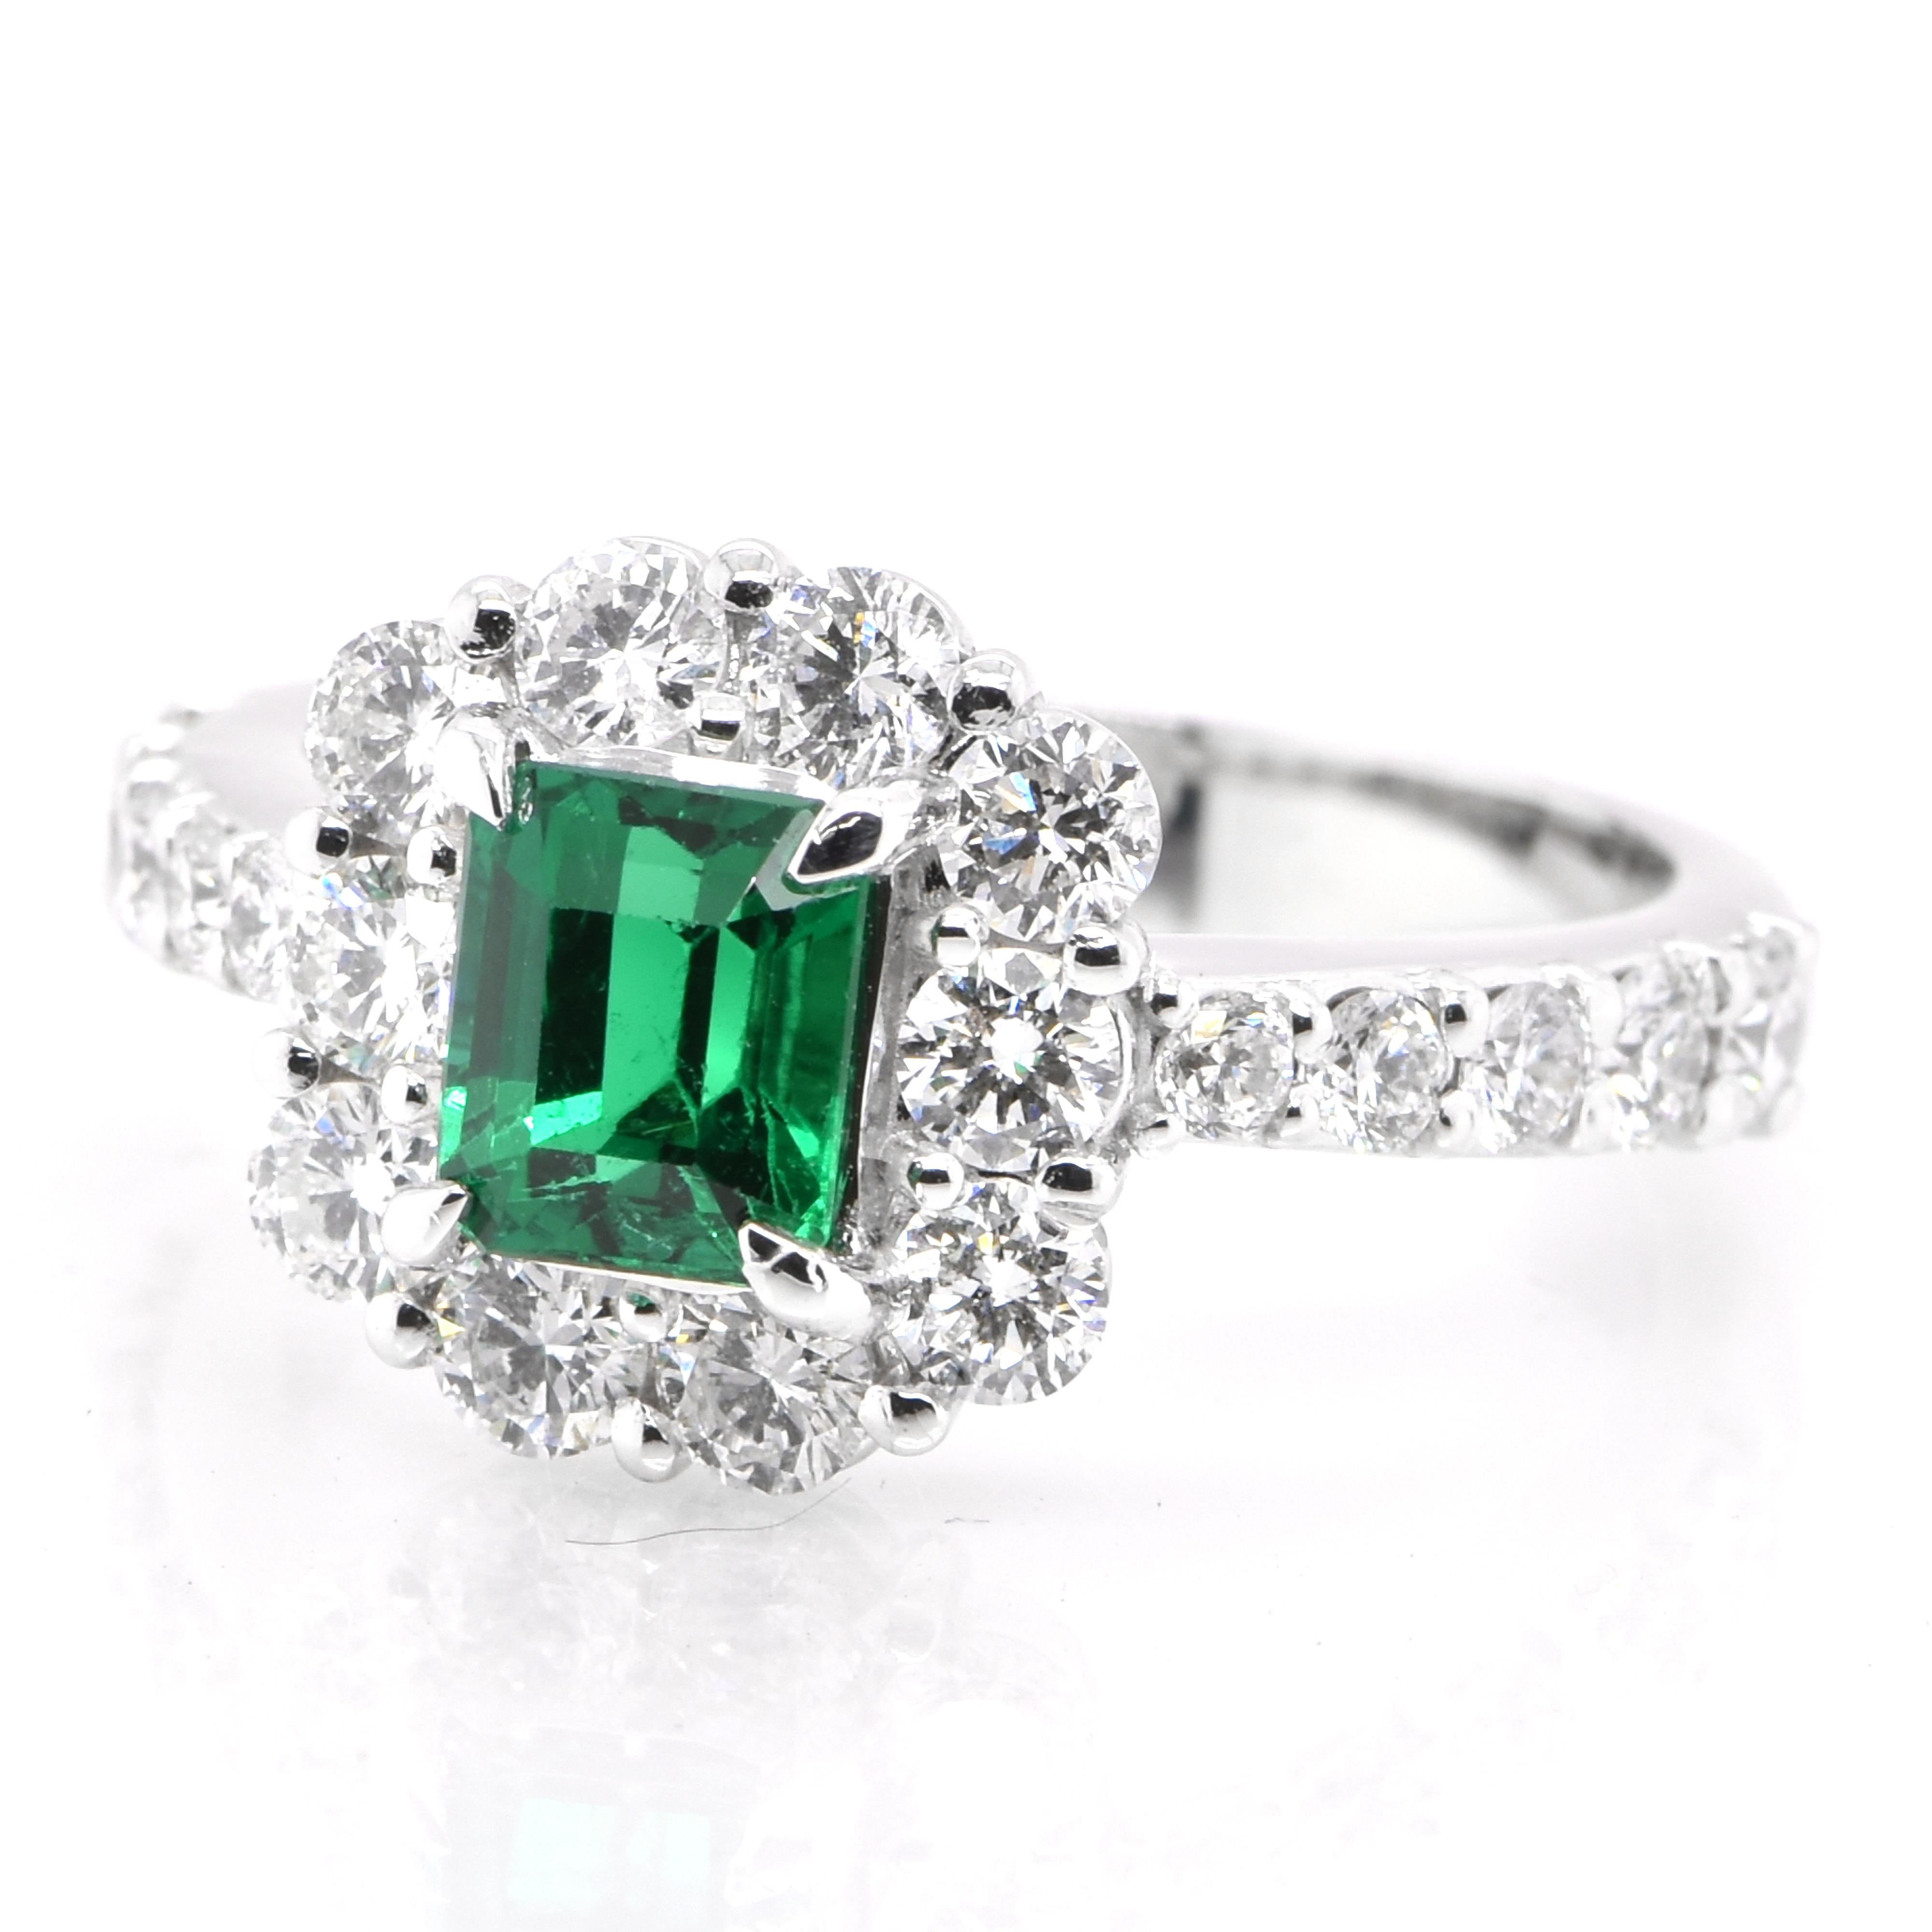 A stunning ring featuring a 0.89 Carat Natural Emerald and 1.11 Carats of Diamond Accents set in Platinum. People have admired emerald’s green for thousands of years. Emeralds have always been associated with the lushest landscapes and the richest